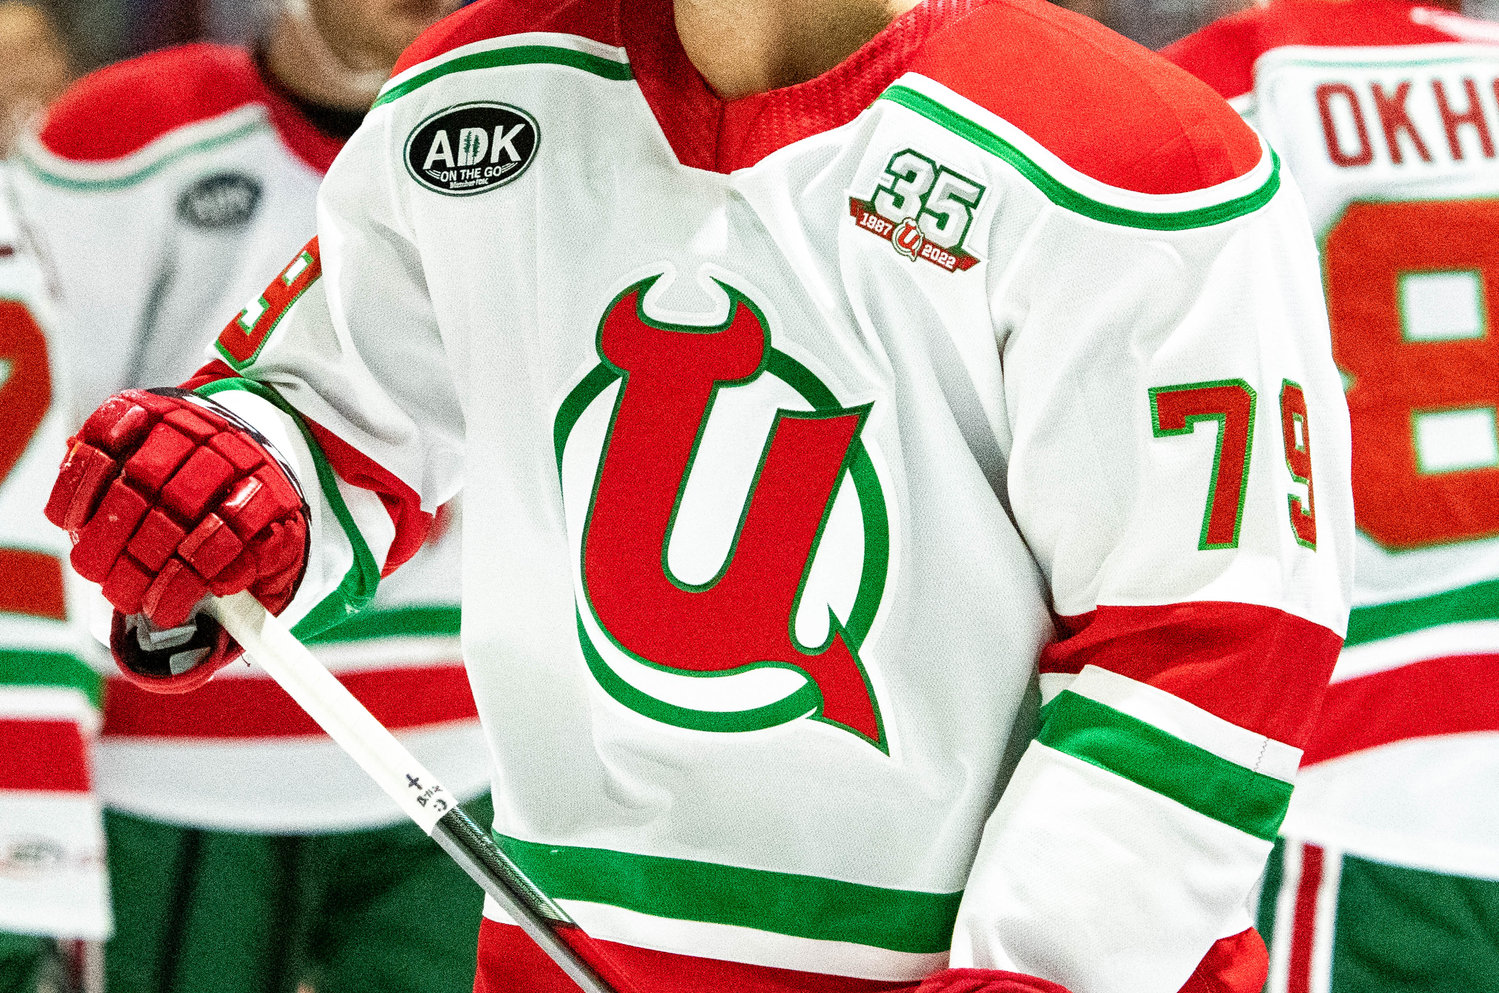 The Utica Comets sported a throwback Utica Devils jersey Saturday night at home to celebrate the 35th anniversary of when that team made its debut in the city as an AHL team. The Comets lost, however, 3-2.